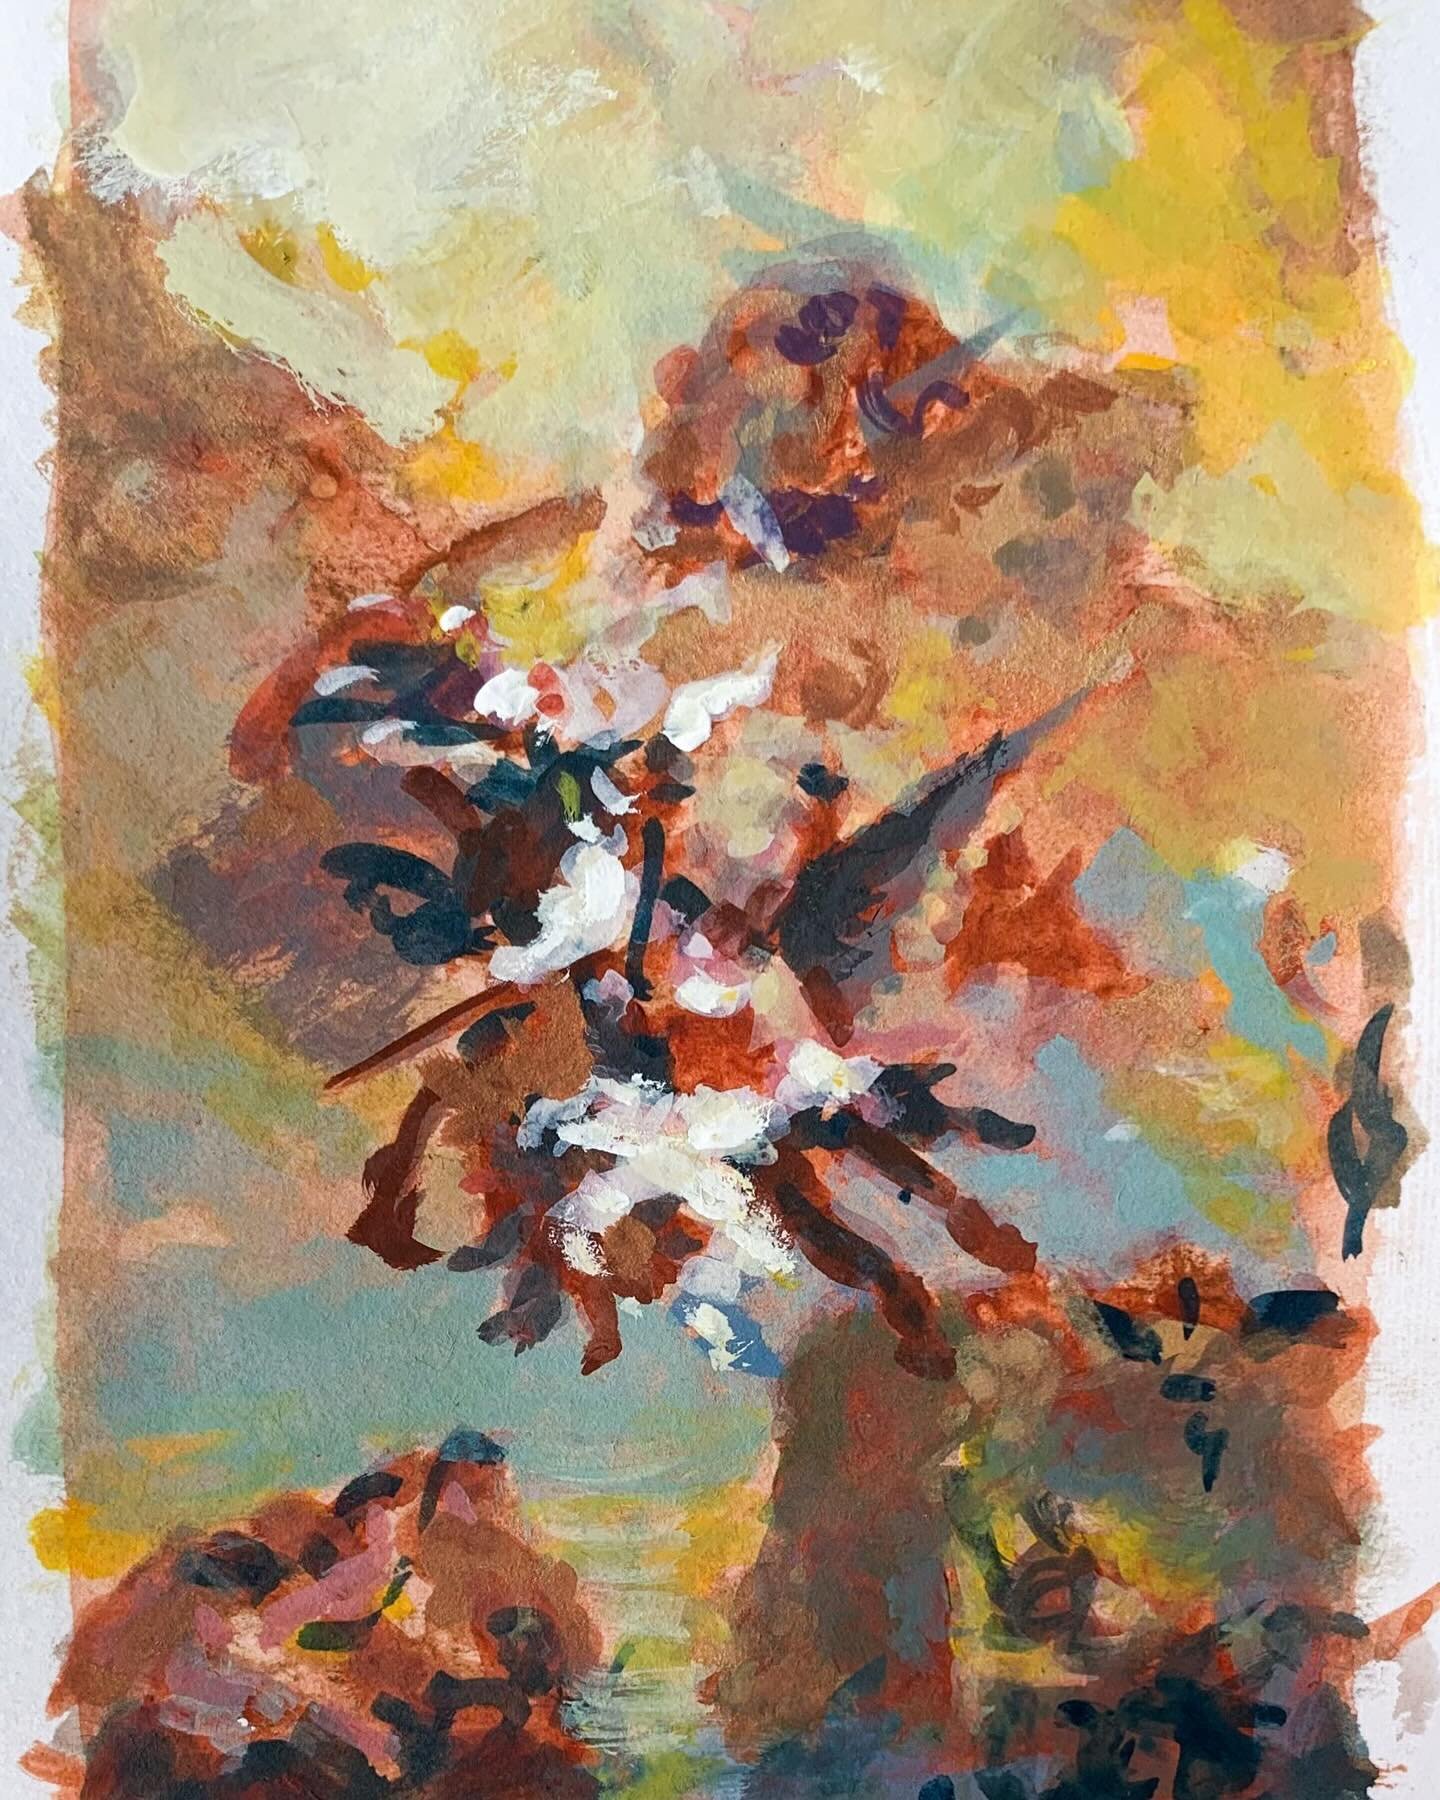 After Tiepolo &mdash; Perseus and Andromeda 

-
Looking back at some transcriptions of Tiepolo, in particular the values and hues to create structure and movement.
⠀⠀⠀⠀⠀⠀⠀⠀⠀
Gouache on Paper
7 x 15 cm
.
. 
.
.
#Tiepolo #Woods #clouds #Contrejour #oil